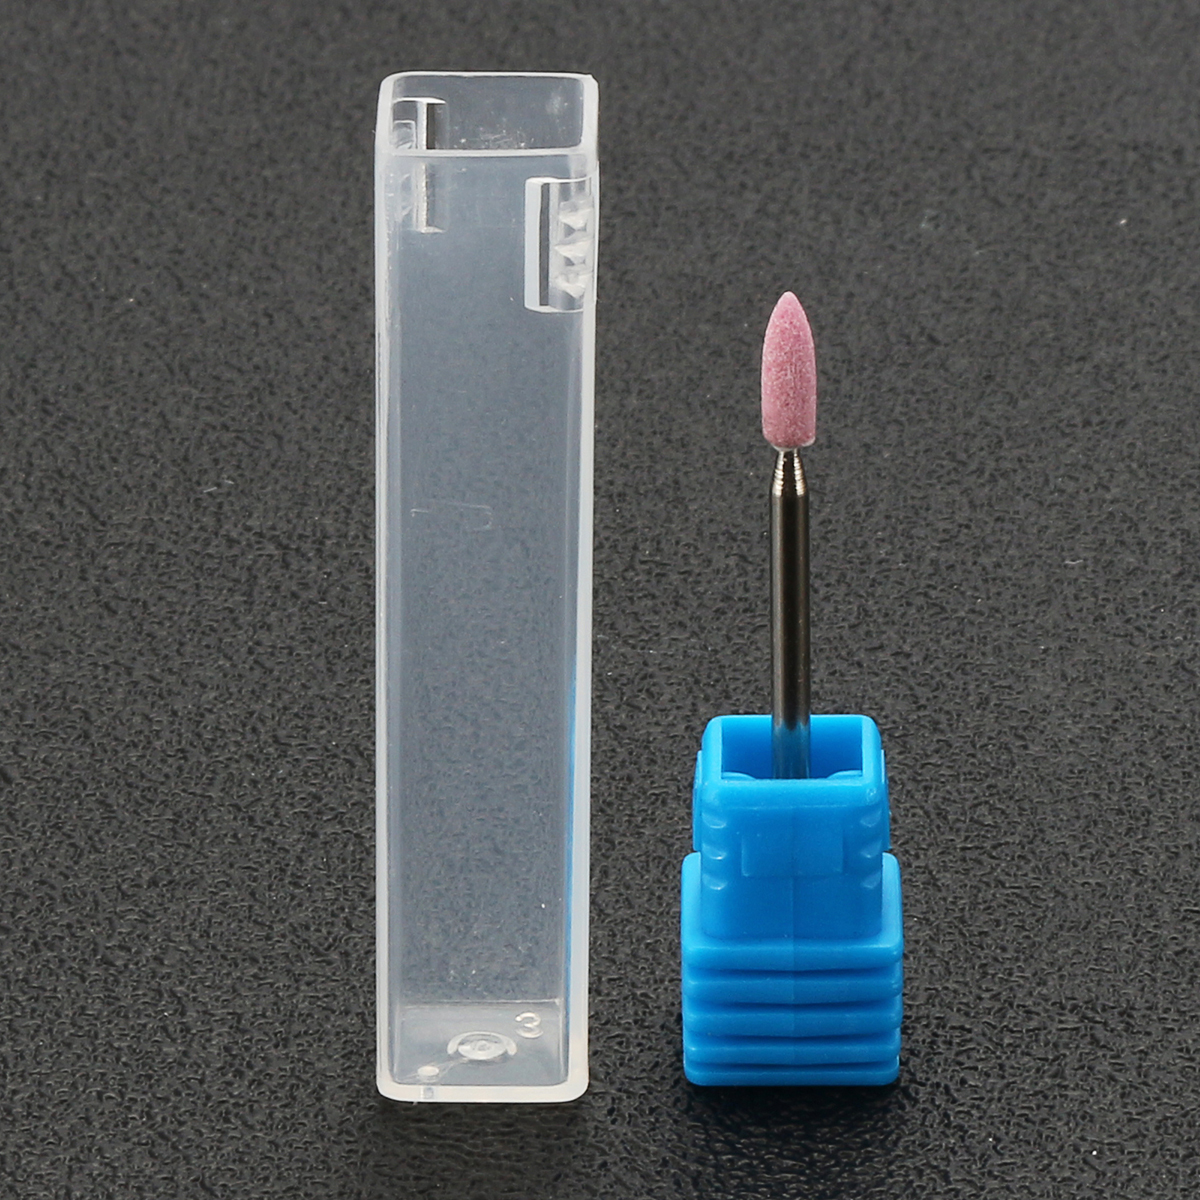 235mm-Pink-Ceramic-Nail-Drill-Bit-Grinding-File-Head-Manicure-Tools-Pedicure-Cuticle-Remover-1146366